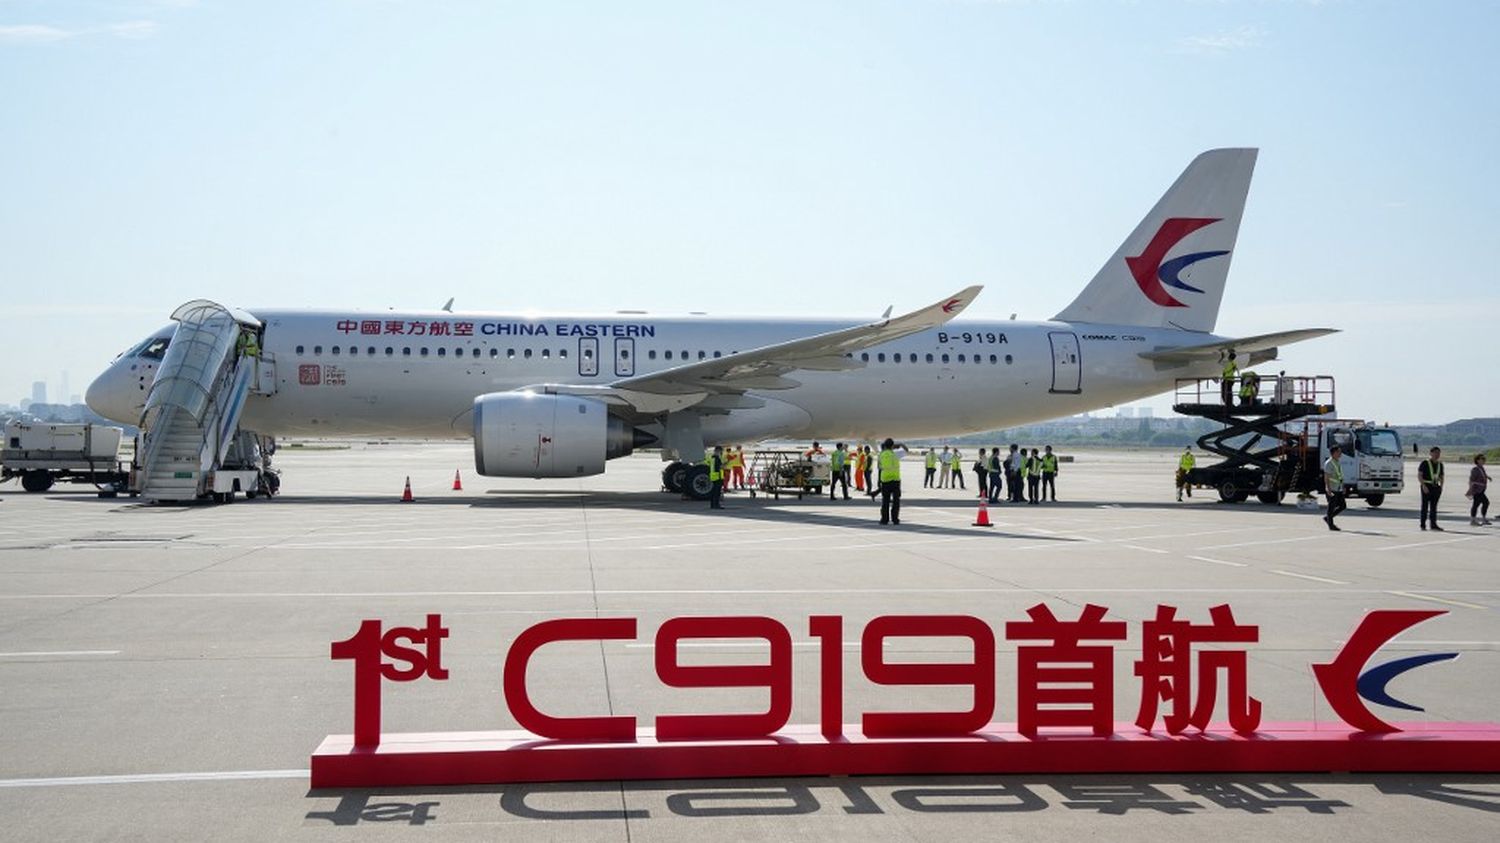 Aviation: China's first airliner completed its maiden commercial flight
